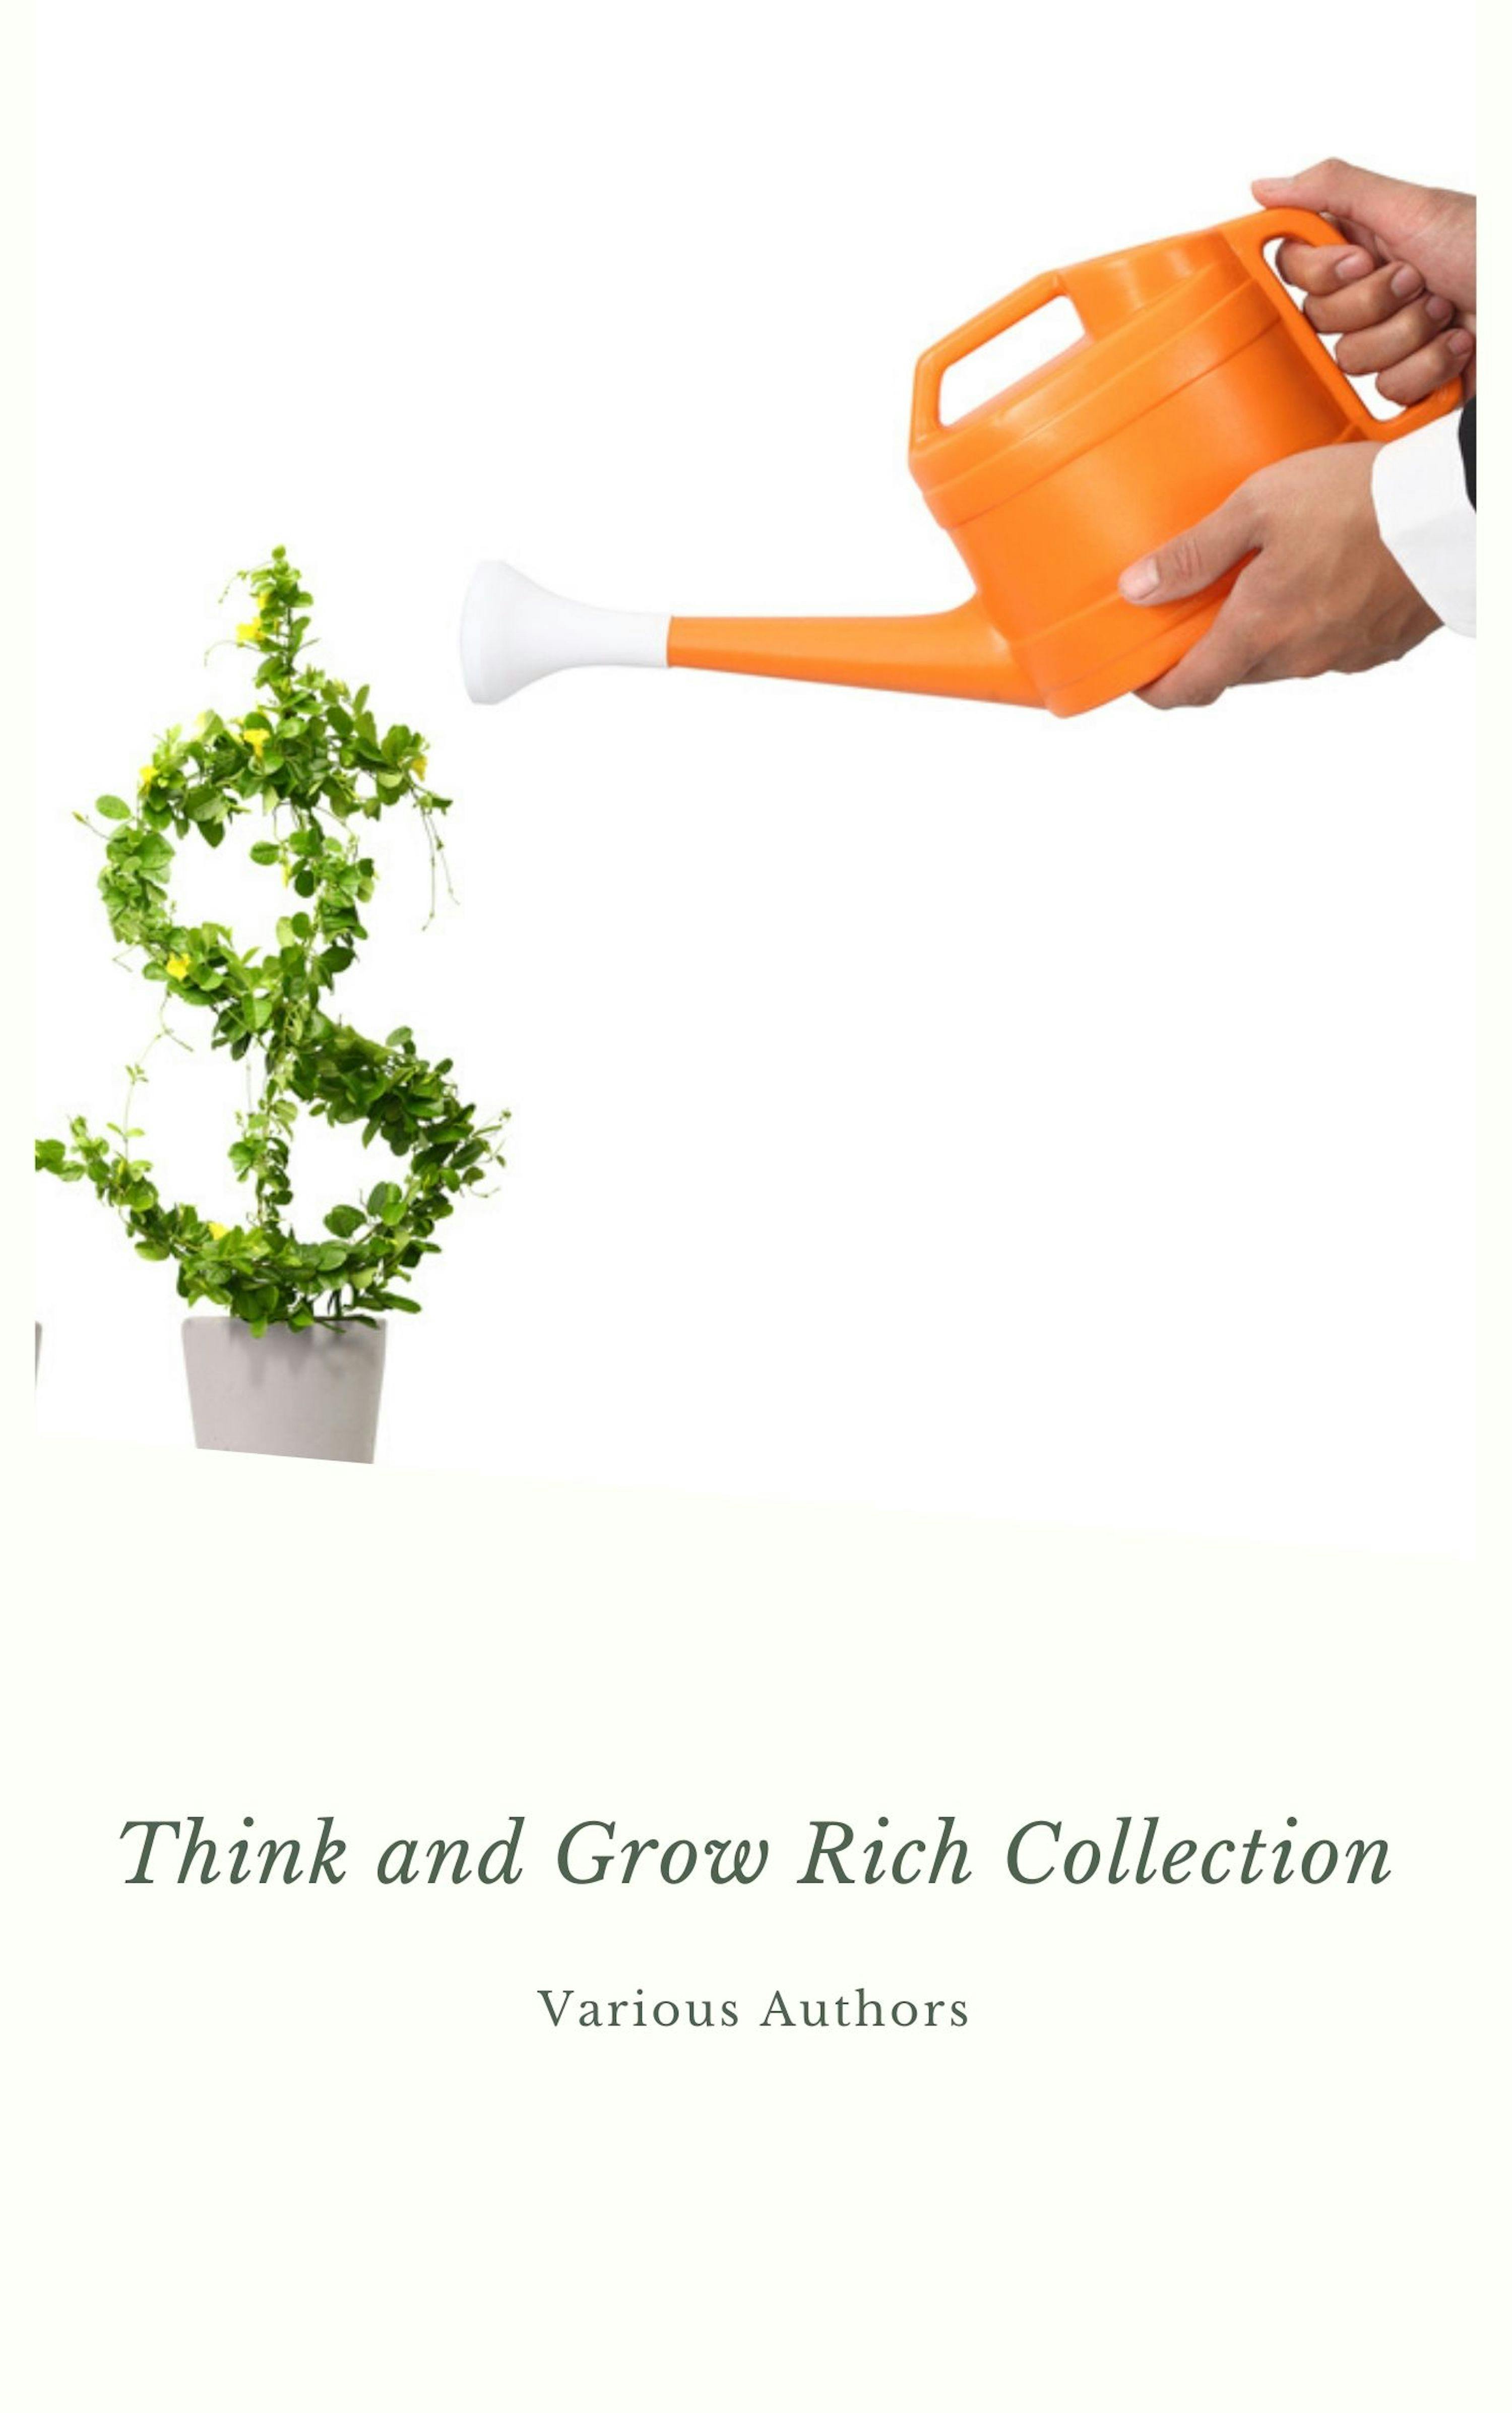 Think and Grow Rich Collection - The Essentials Writings on Wealth and Prosperity: Think and Grow Rich, The Way to Wealth, The Science of Getting Rich, Eight Pillars of Prosperity... - Lao Tzu, Benjamin Franklin, Marcus Aurelius, Orison Swett Marden, Sun Tzu, Napoleon Hill, Charles F. Haanel, Joseph Murphy, Dale Carnegie, Khalil Gibran, P.T. Barnum, James Allen, Samuel Smiles, Wallace D. Wattles, Florence Scovel Shinn, Abner Bayley